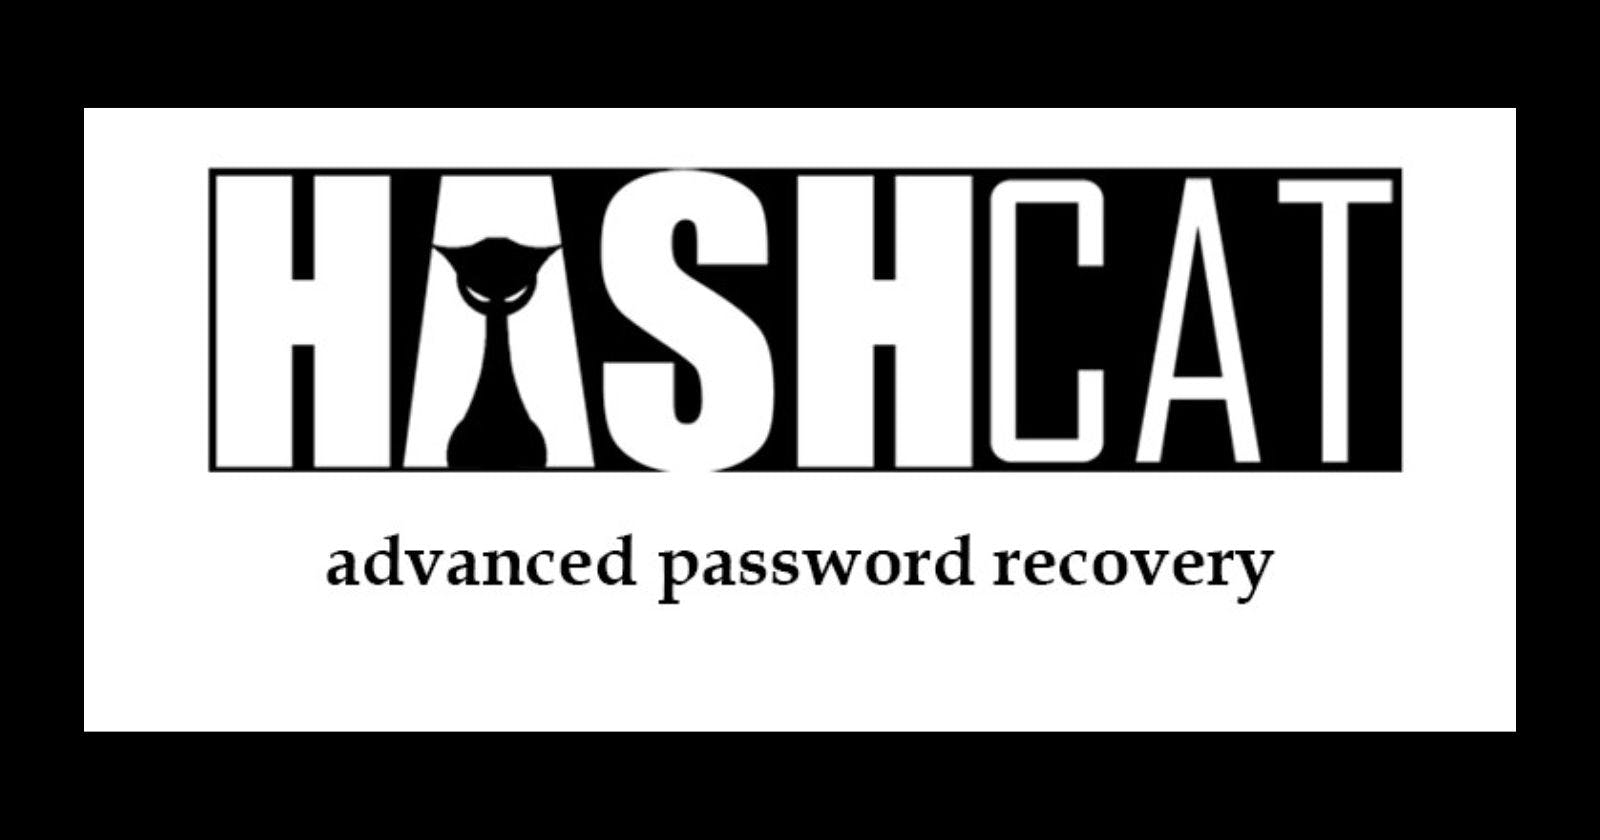 How to Use Hashcat in Kali Linux